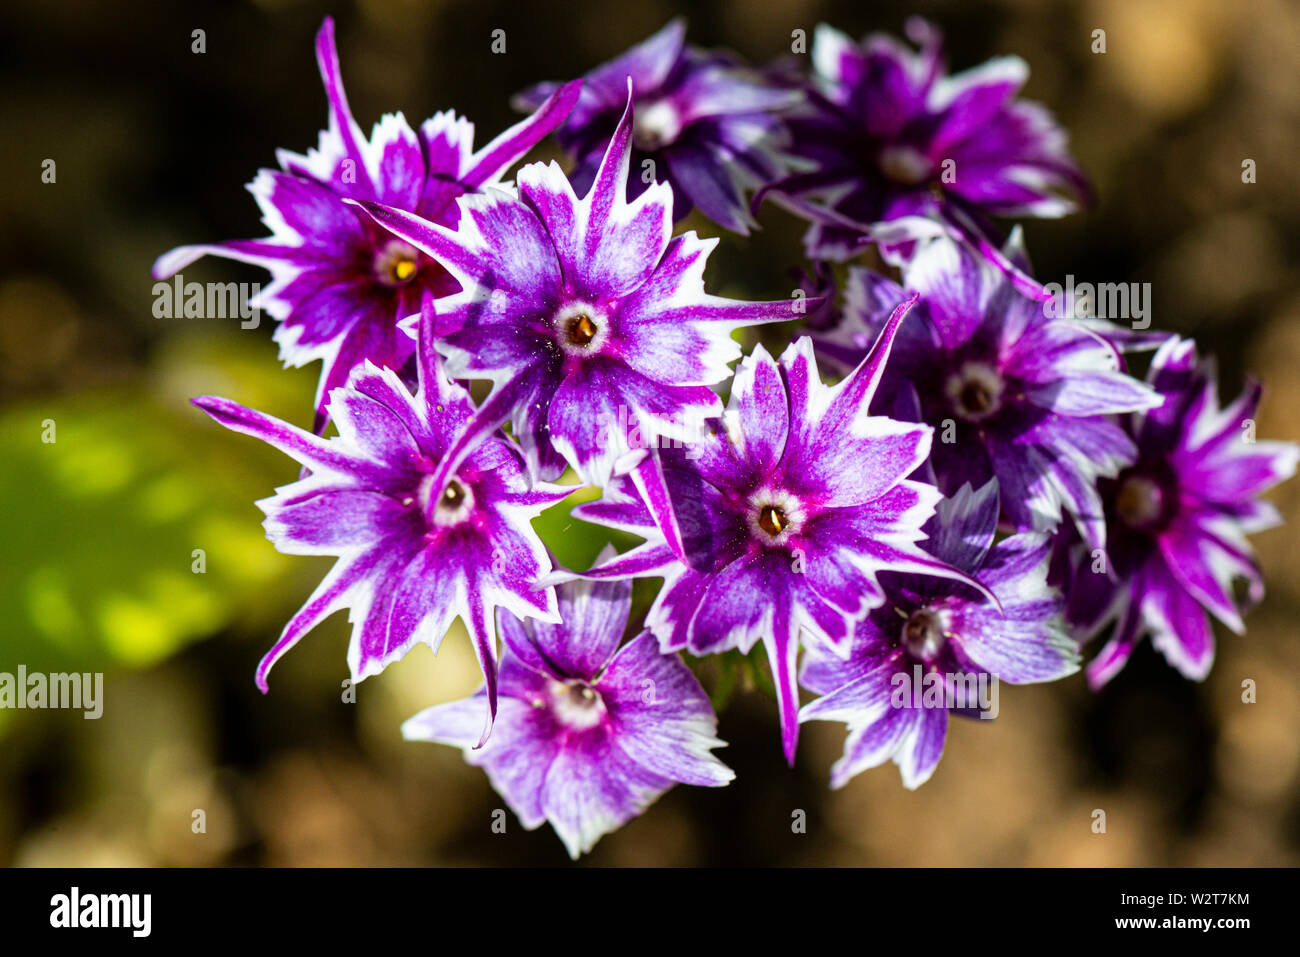 A close up of the flowers of a Phlox drummondii Popstars Mixed Stock Photo